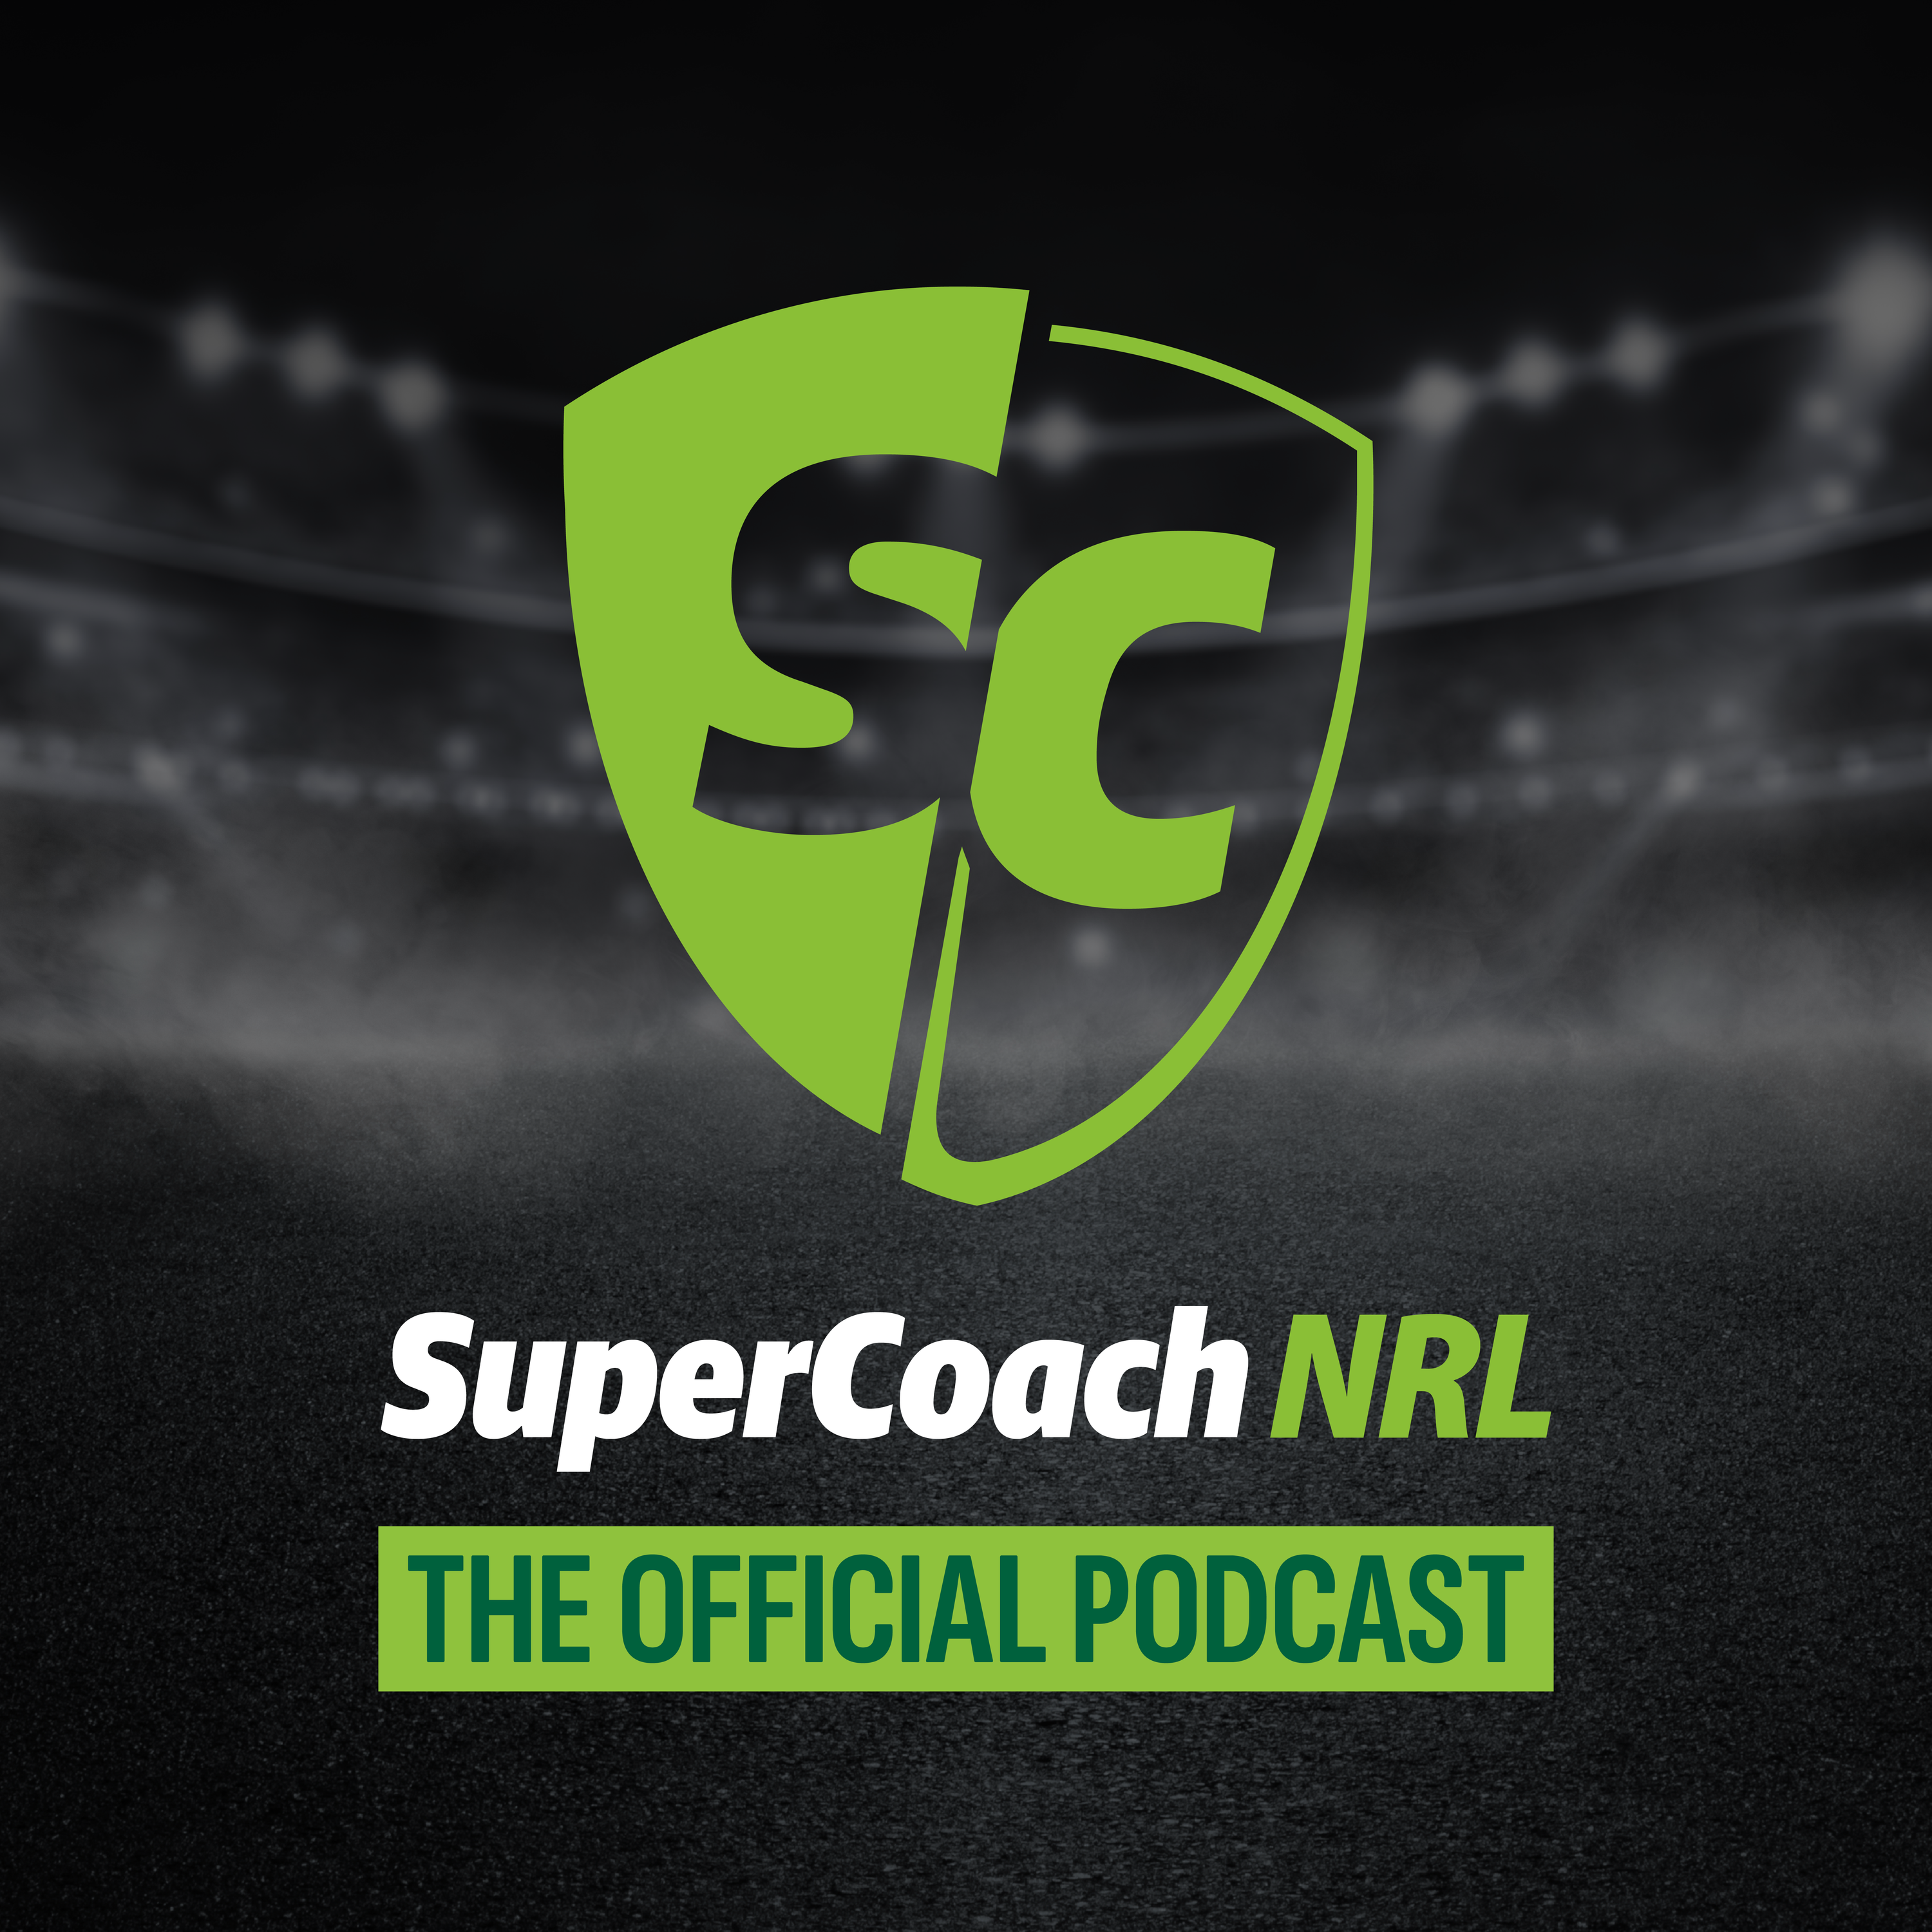 NRL SuperCoach podcast: Round 3 preview